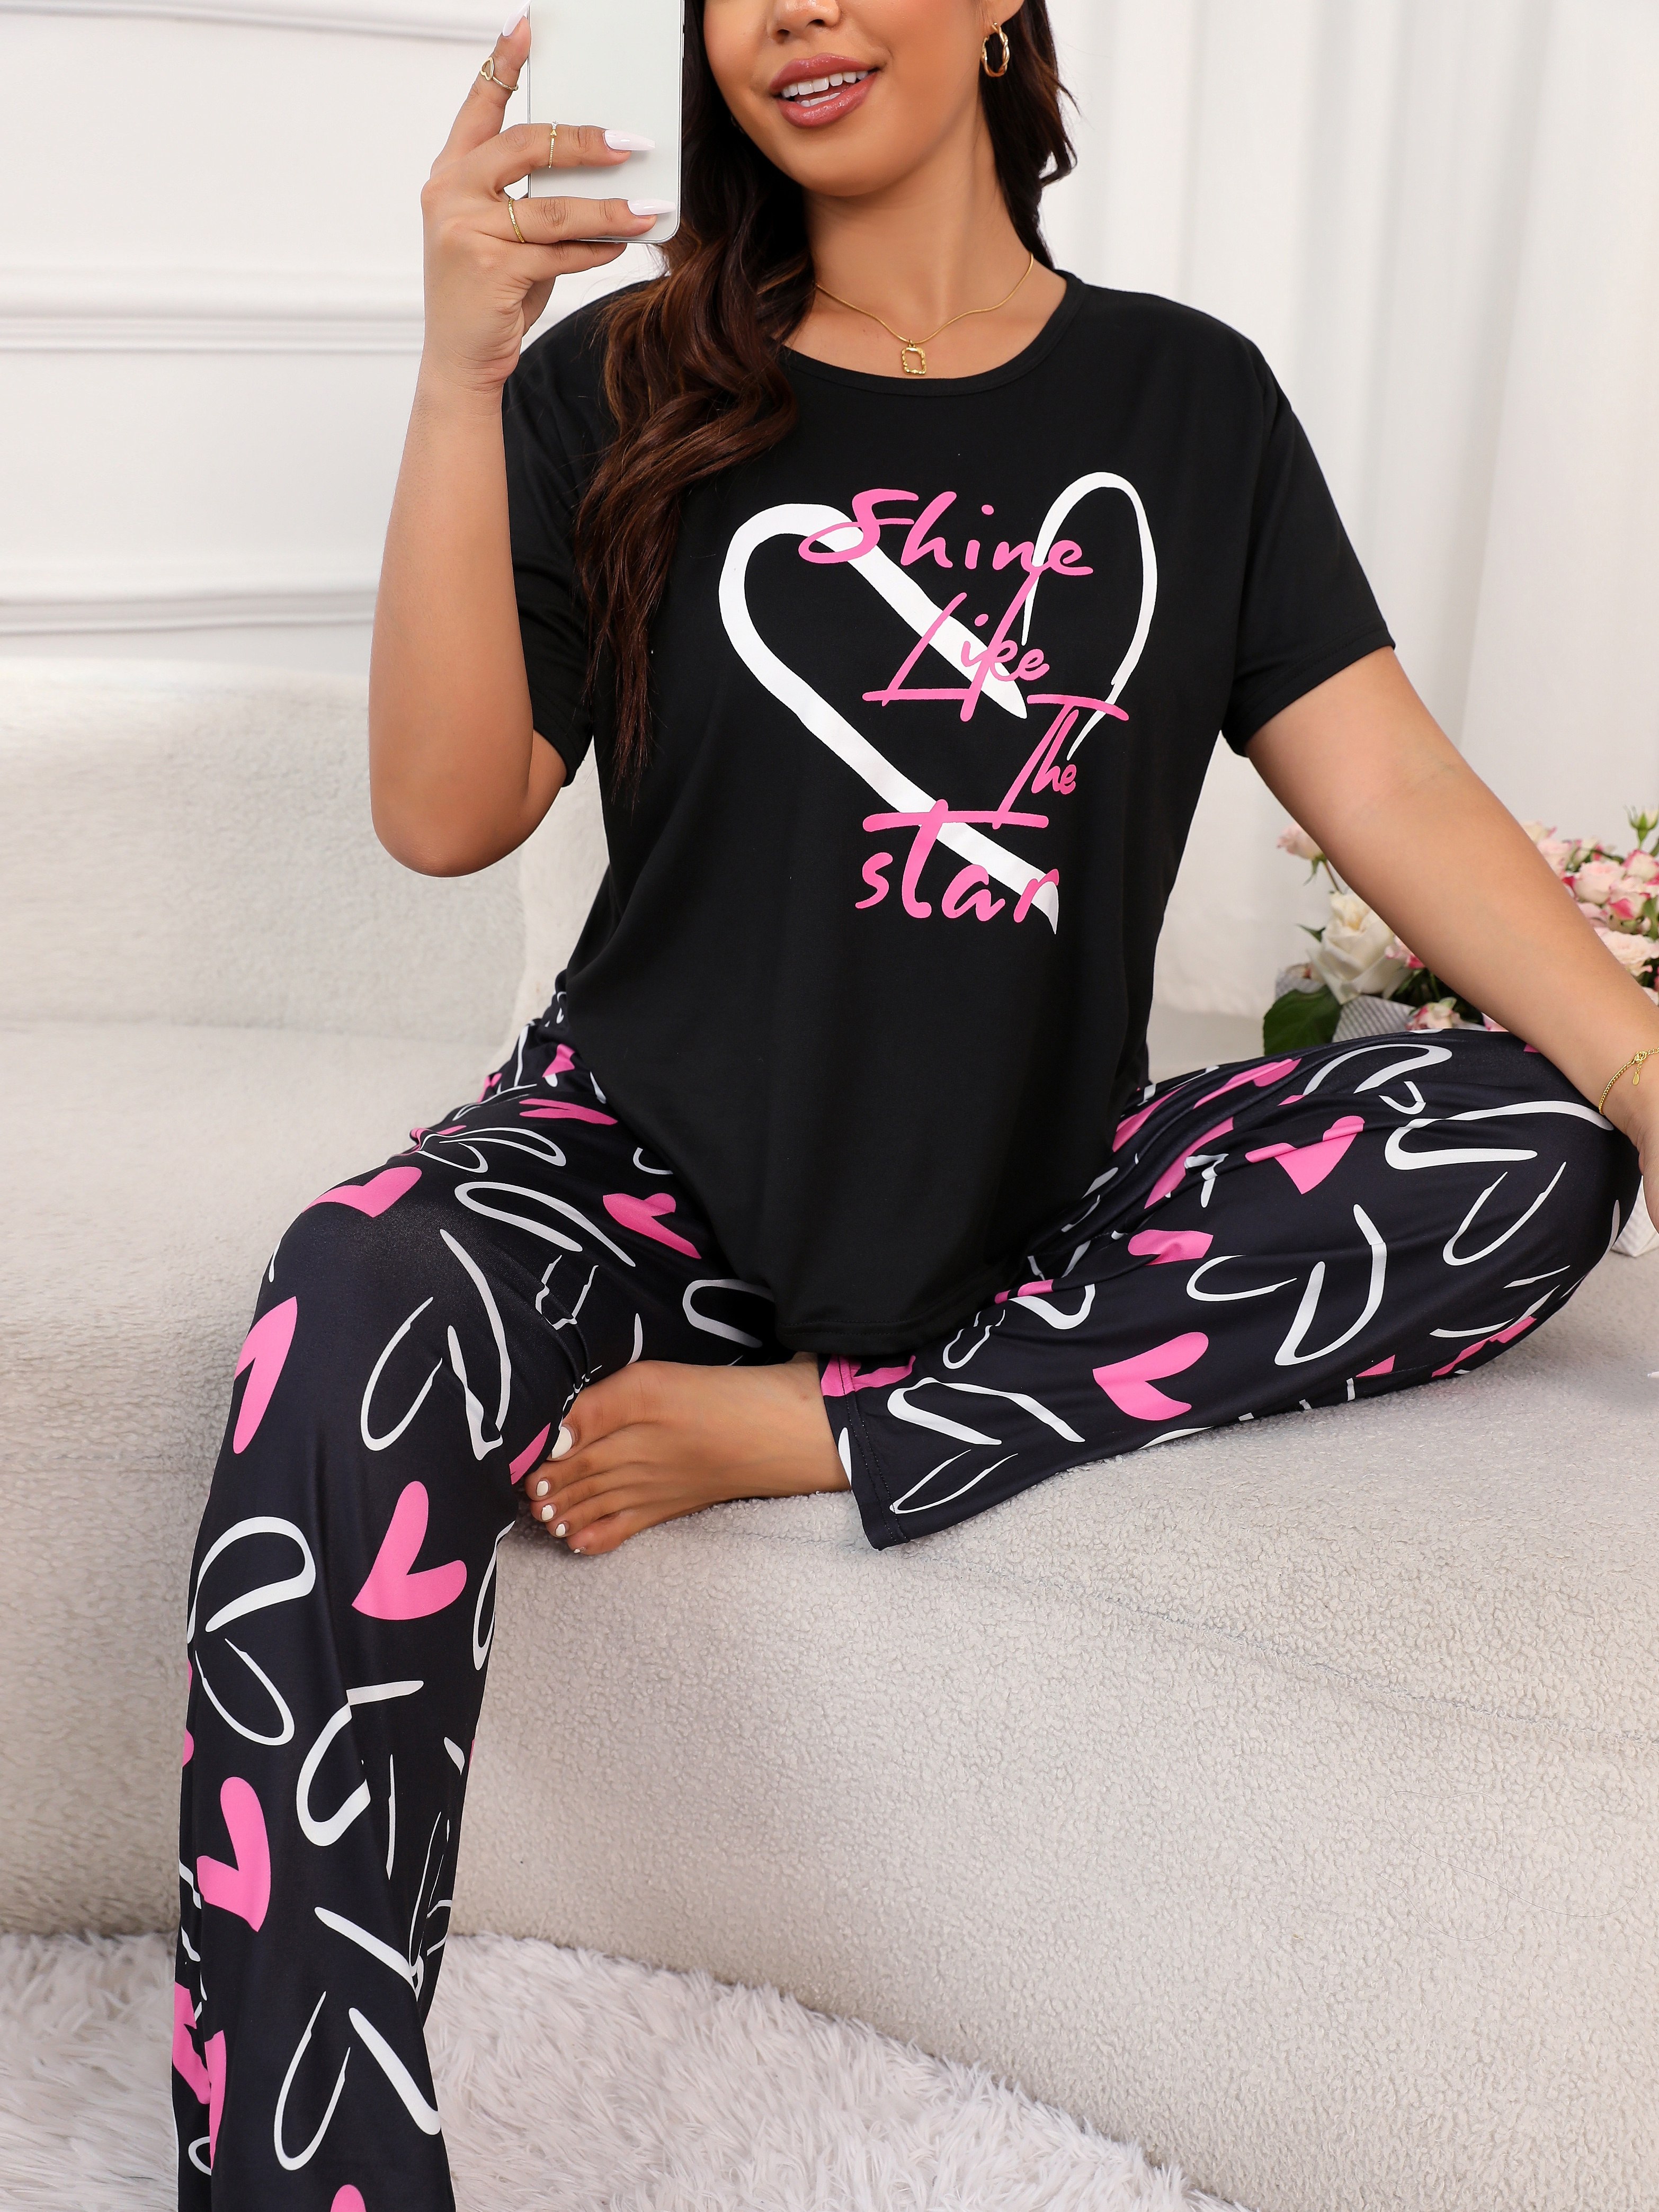 Cute Heart Shaped Printed Pajamas Set For Women, Including Button-up Top  And Shorts, Suitable For Sleep And Home Wear